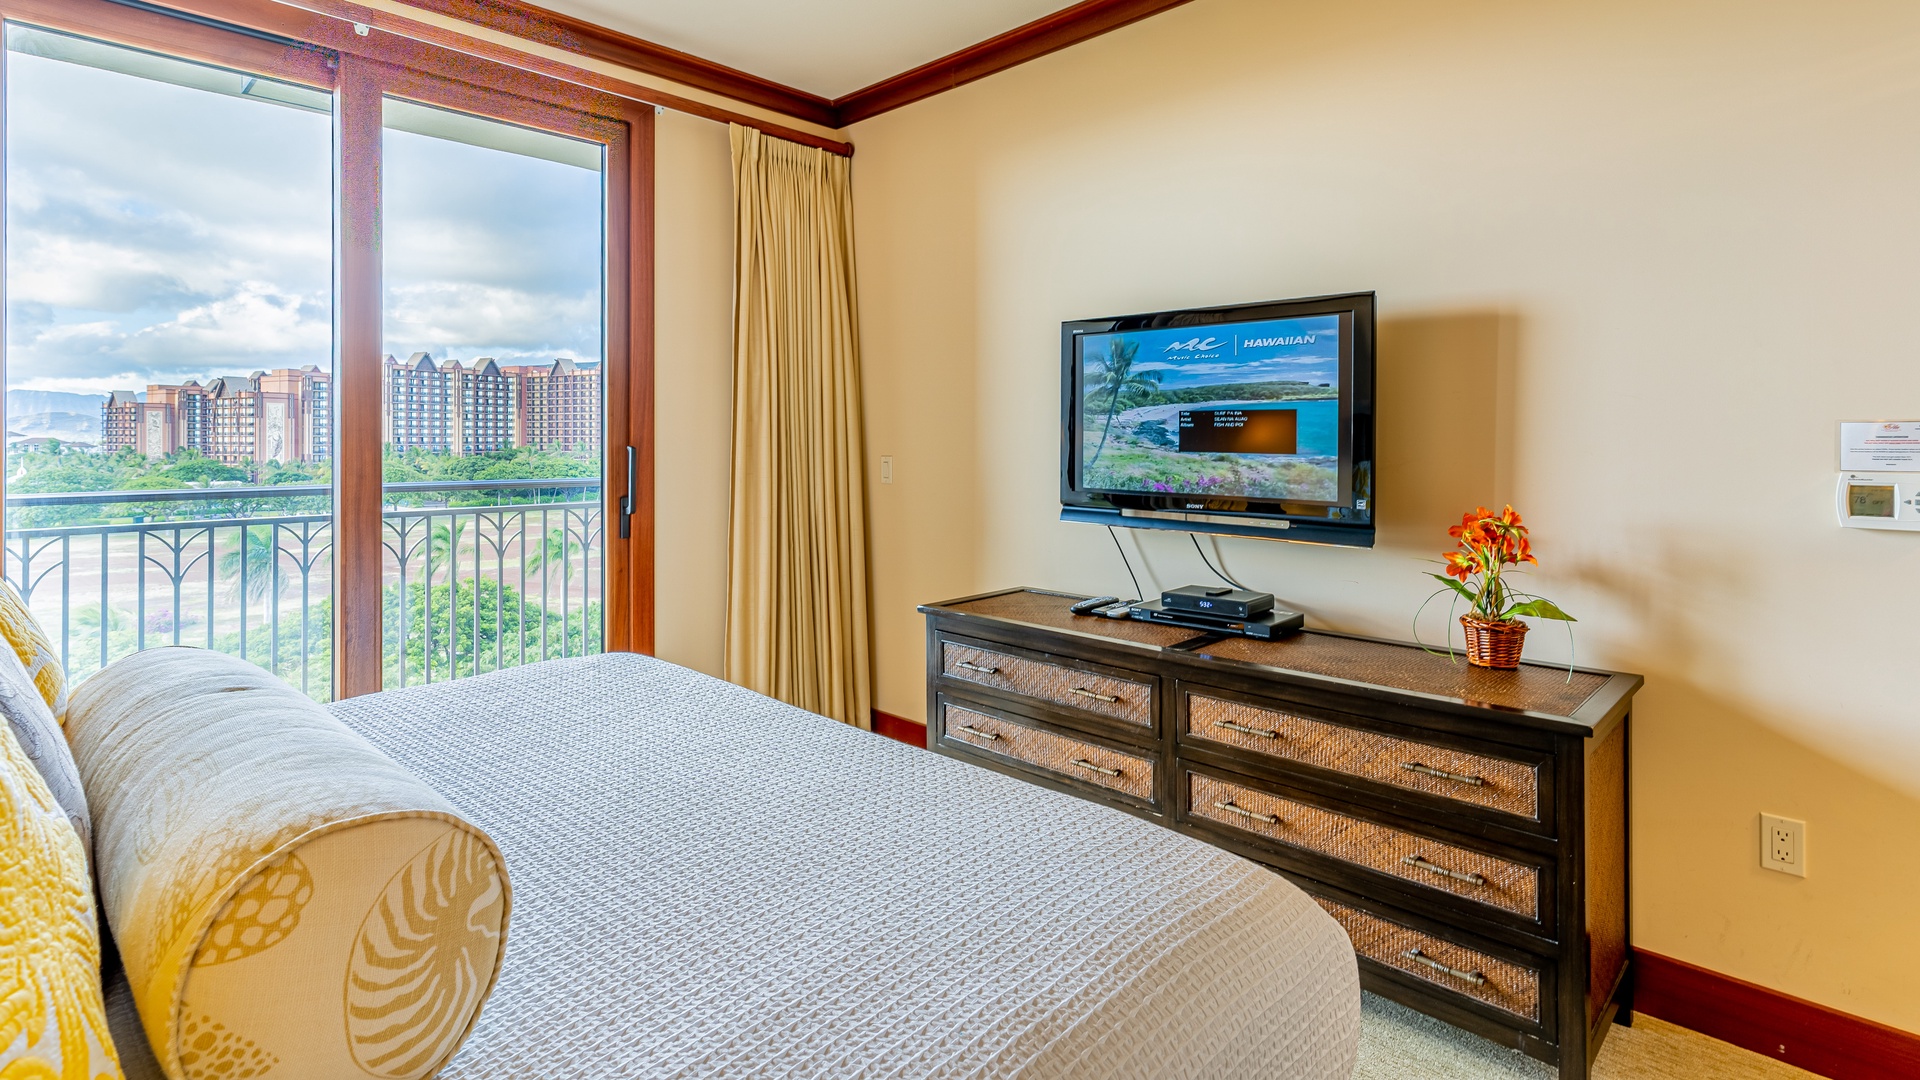 Kapolei Vacation Rentals, Ko Olina Beach Villas B706 - The primary guest bedroom also has a TV, dresser and luxurious linens.